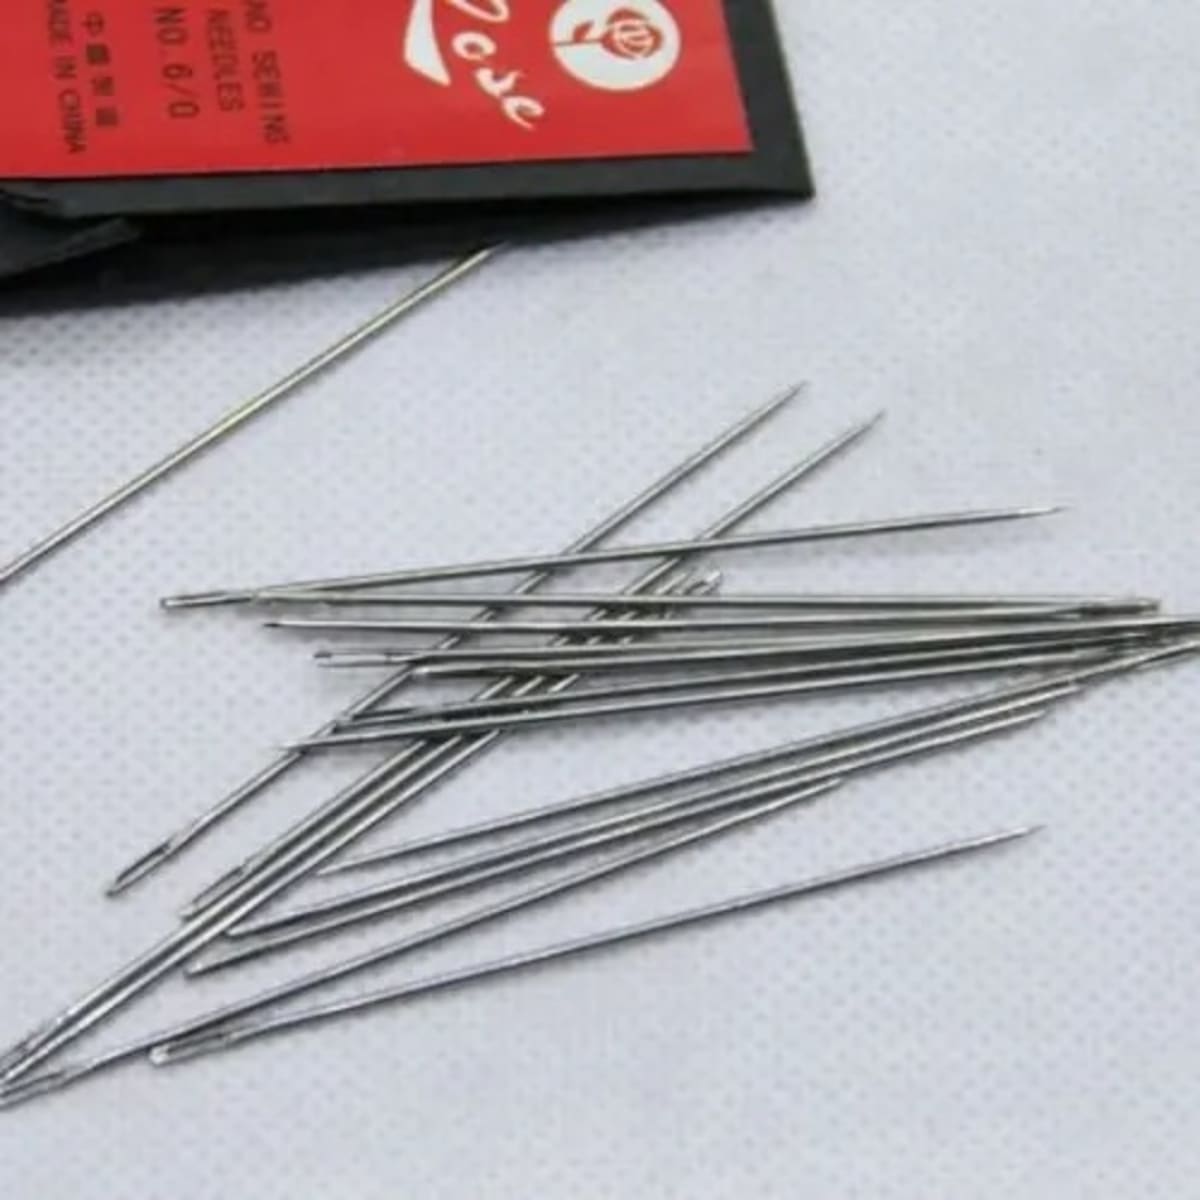 Large Needles Hand Sewing, Long Needles Hand Sewing